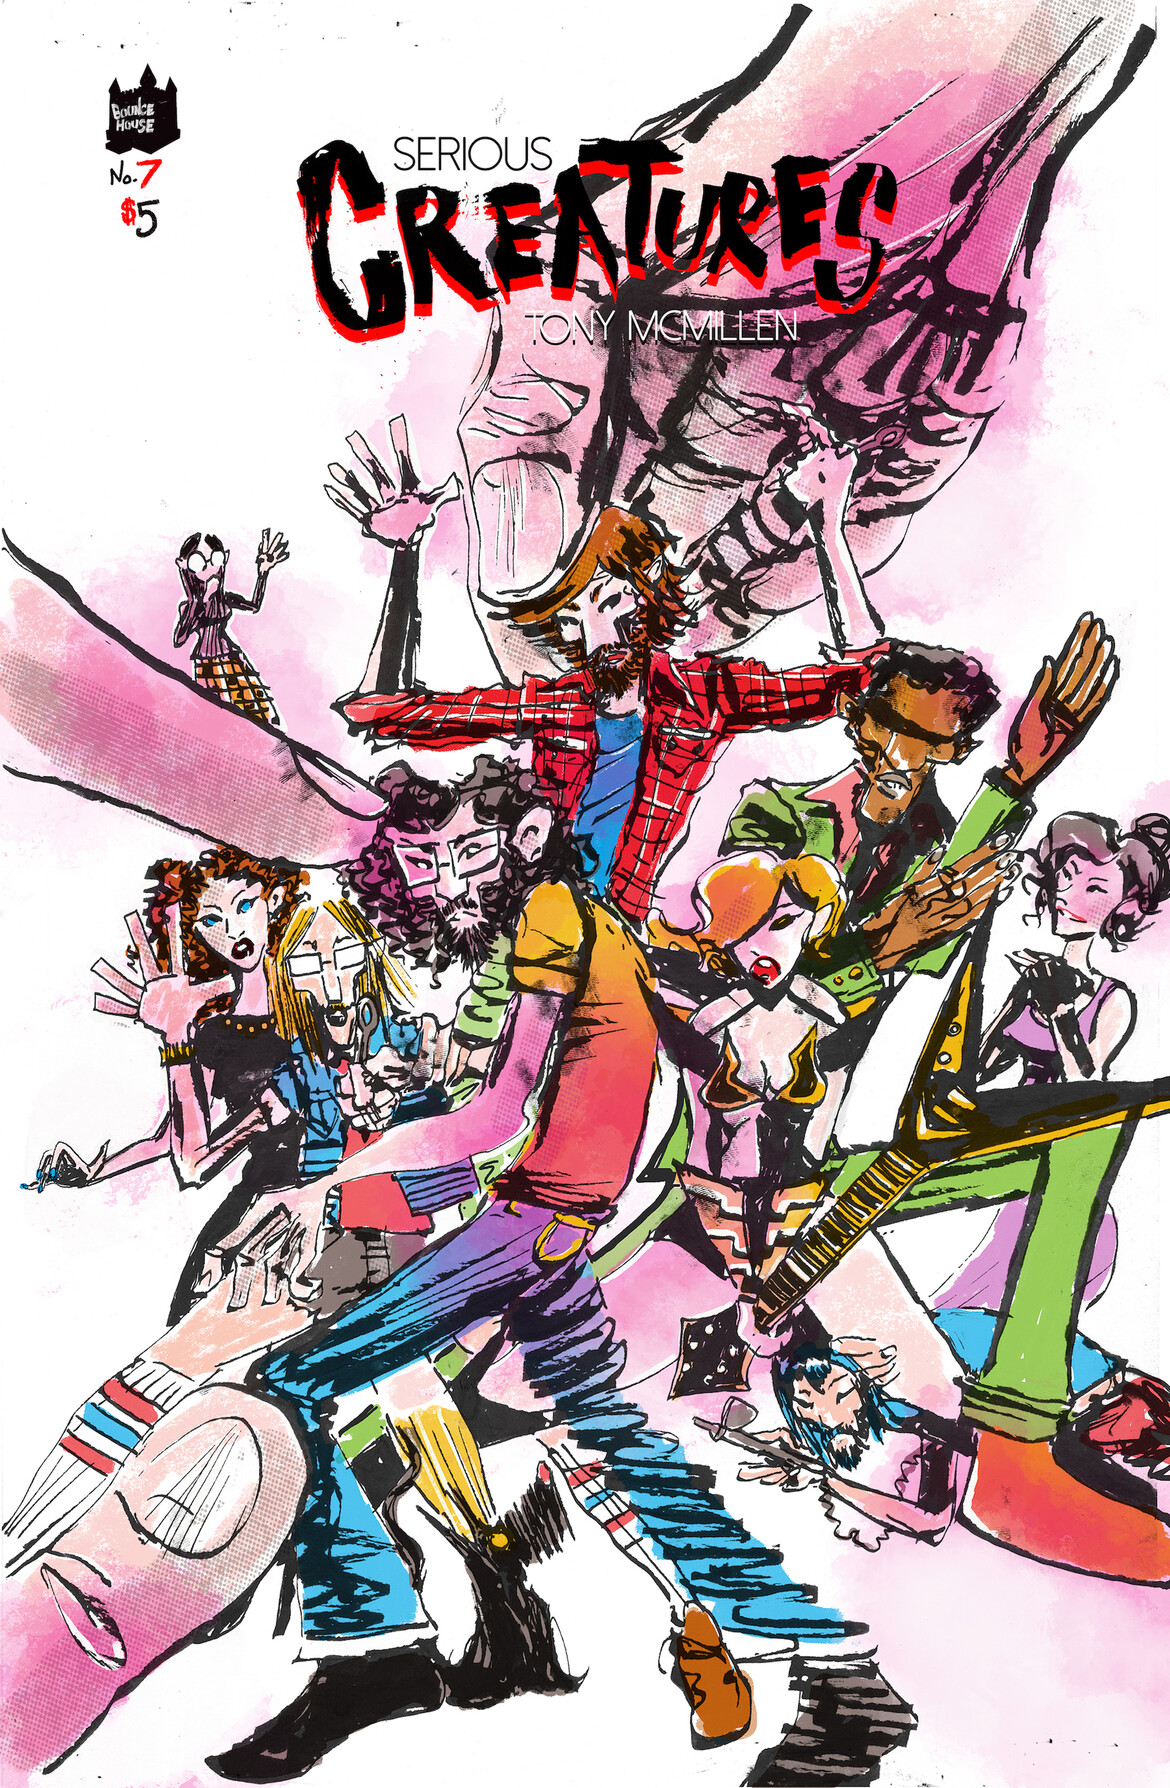 Issue 7 cover